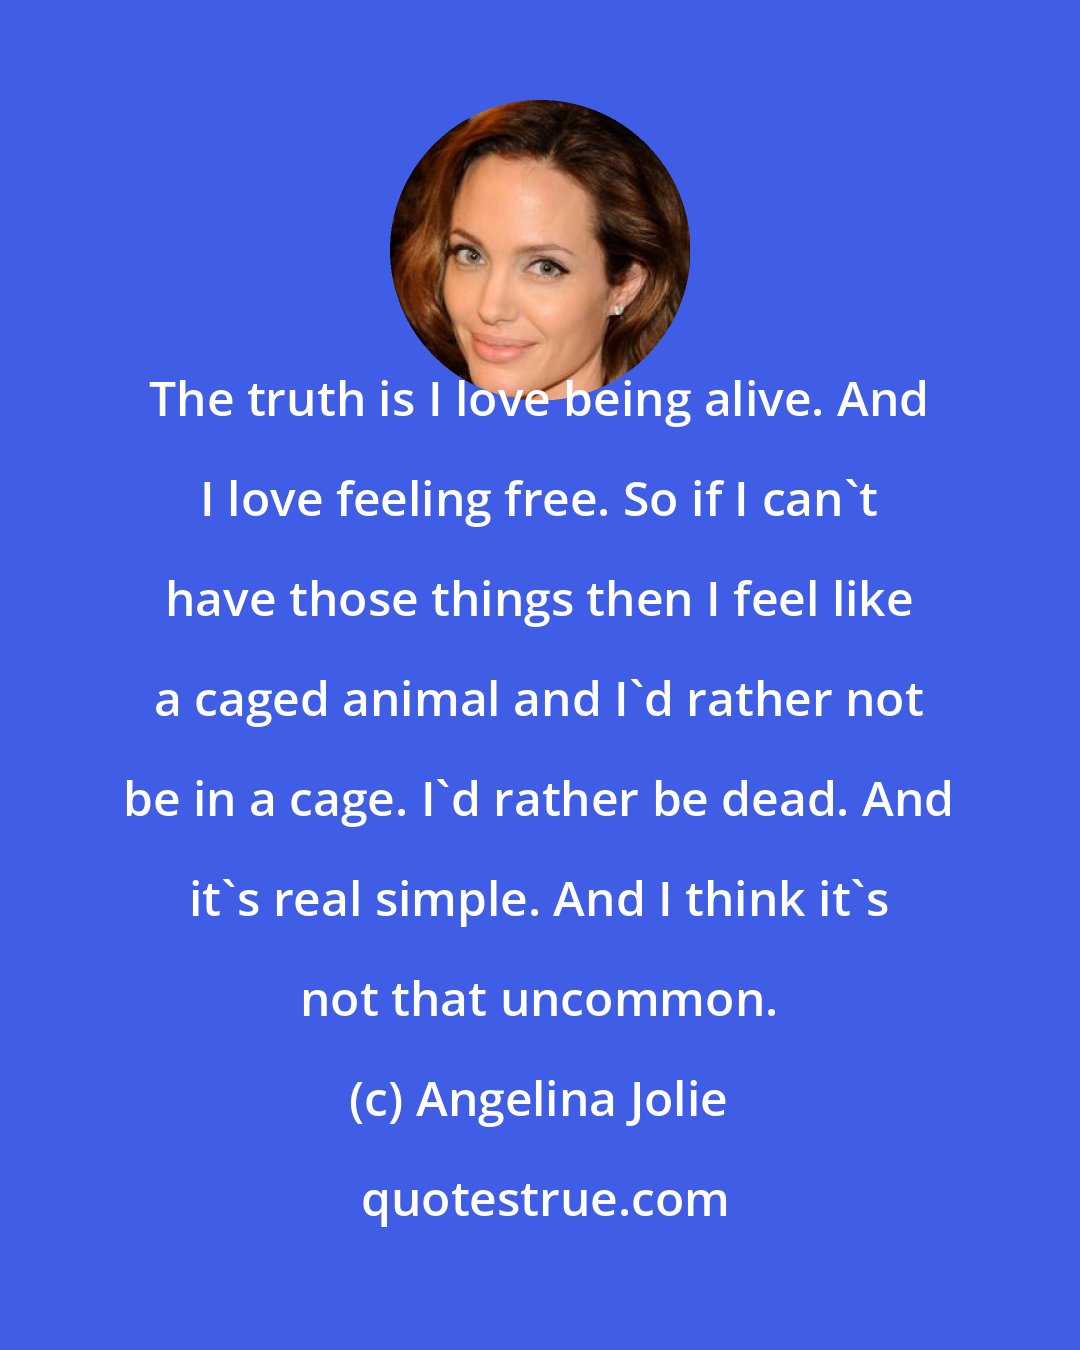 Angelina Jolie: The truth is I love being alive. And I love feeling free. So if I can't have those things then I feel like a caged animal and I'd rather not be in a cage. I'd rather be dead. And it's real simple. And I think it's not that uncommon.